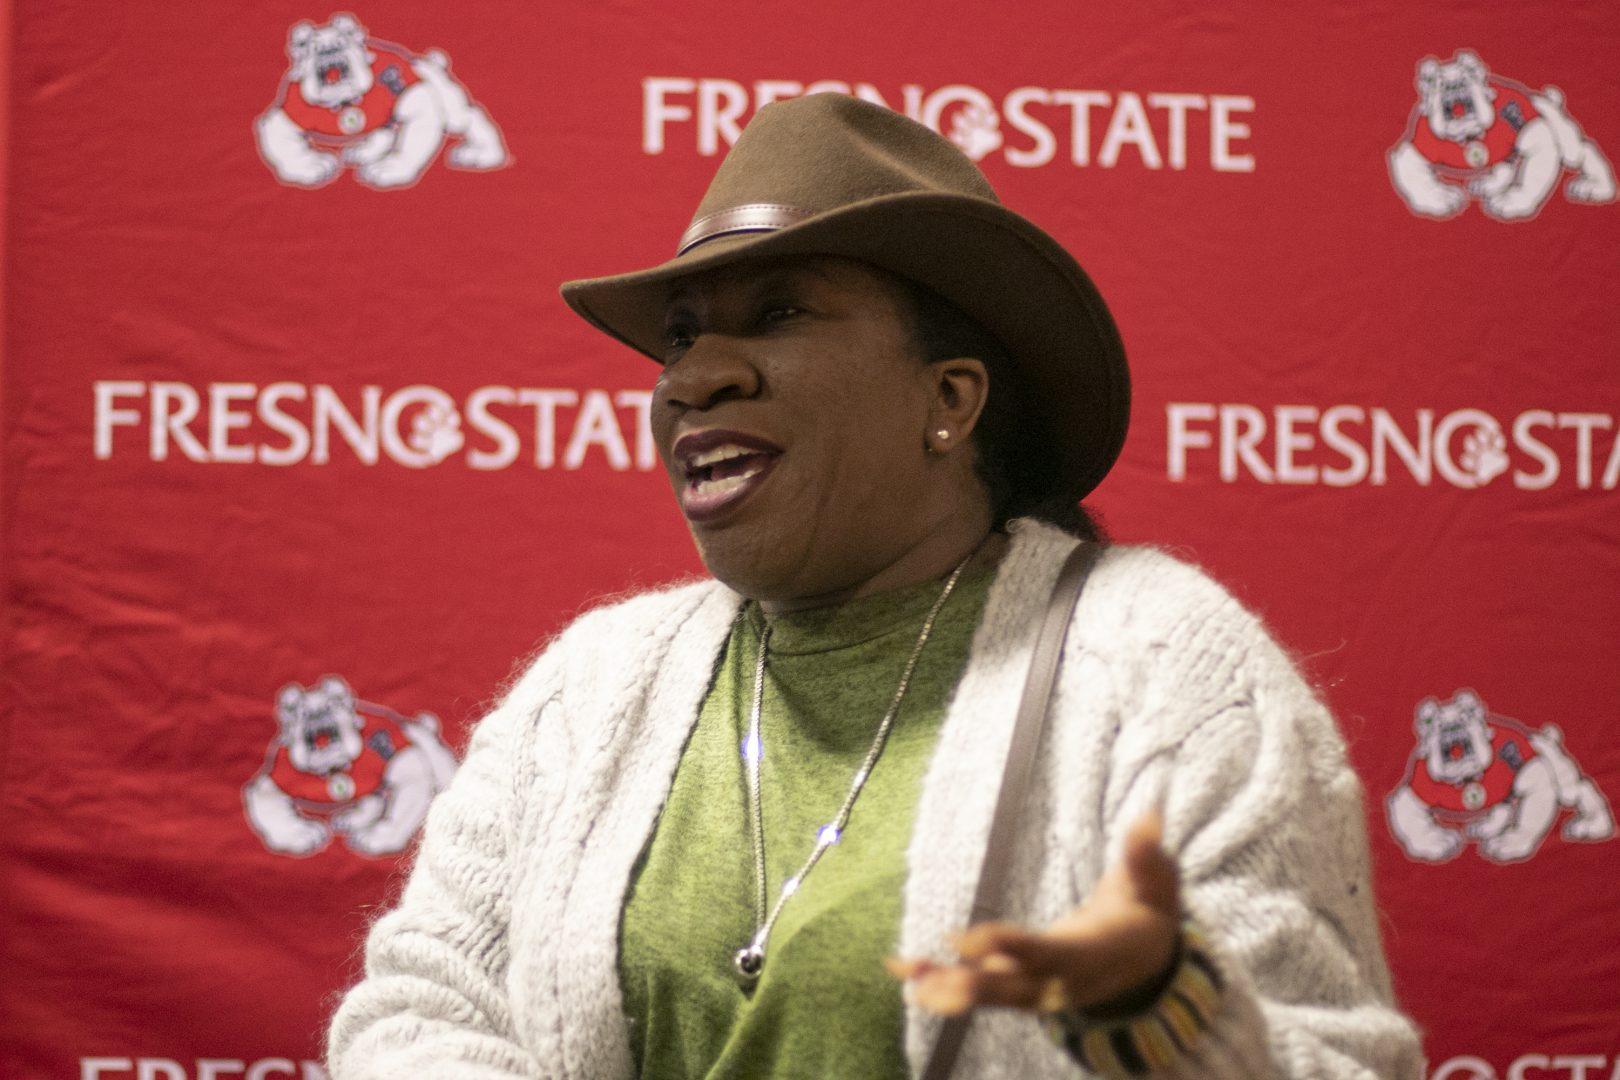 Tarana Burke, founder of the Me Too movement, speaks to students and faculty during An Evening of Empowerment and Advocacy in the Satellite Student Union on Wednesday, Feb. 6, 2019.  (Larry Valenzuela/The Collegian)